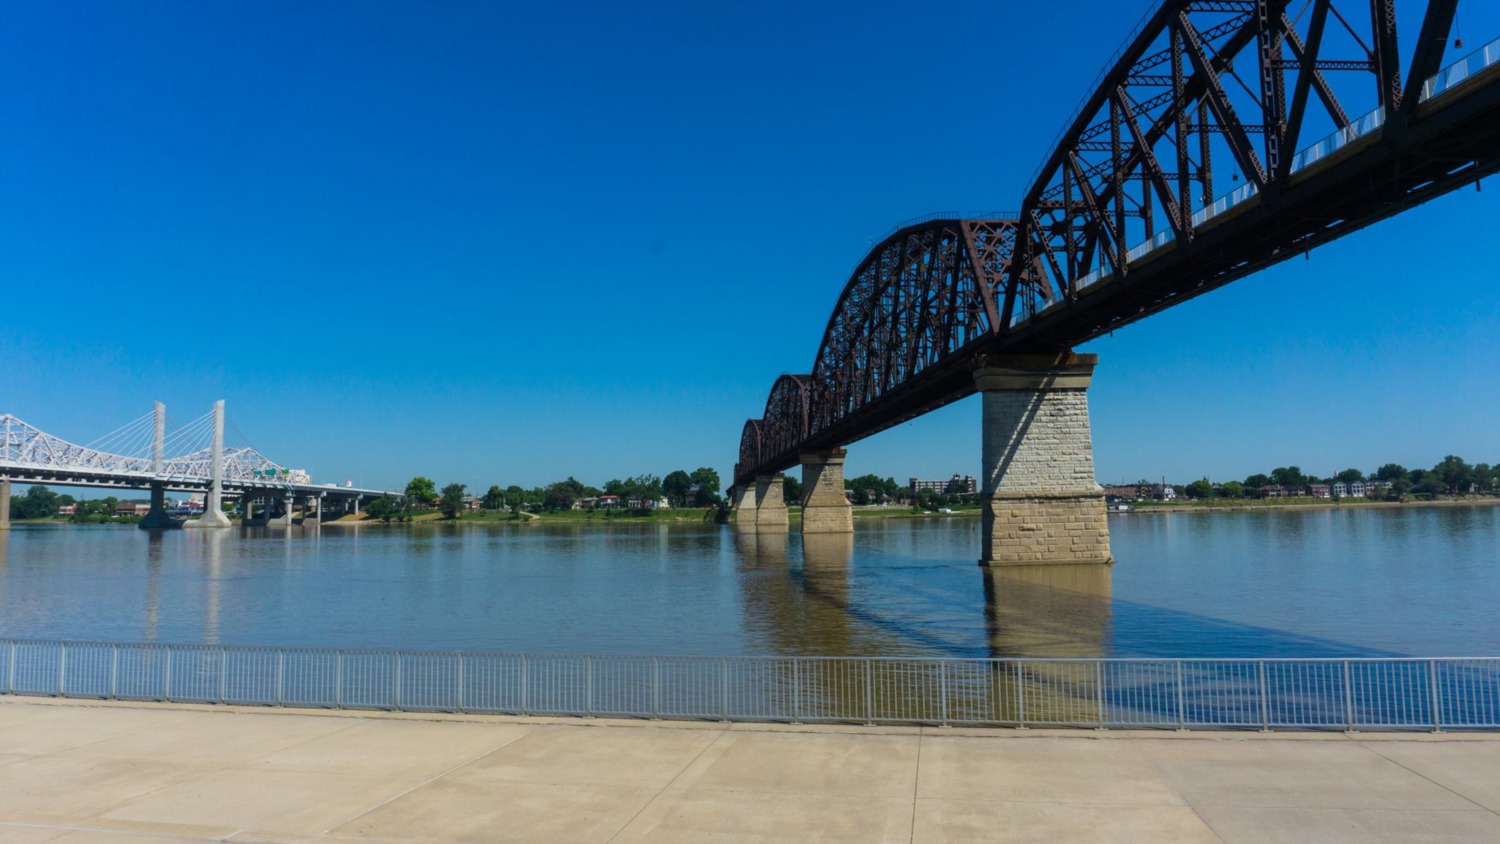 The Louisville Waterfront Park In Kentucky Is Accessible And Beautiful